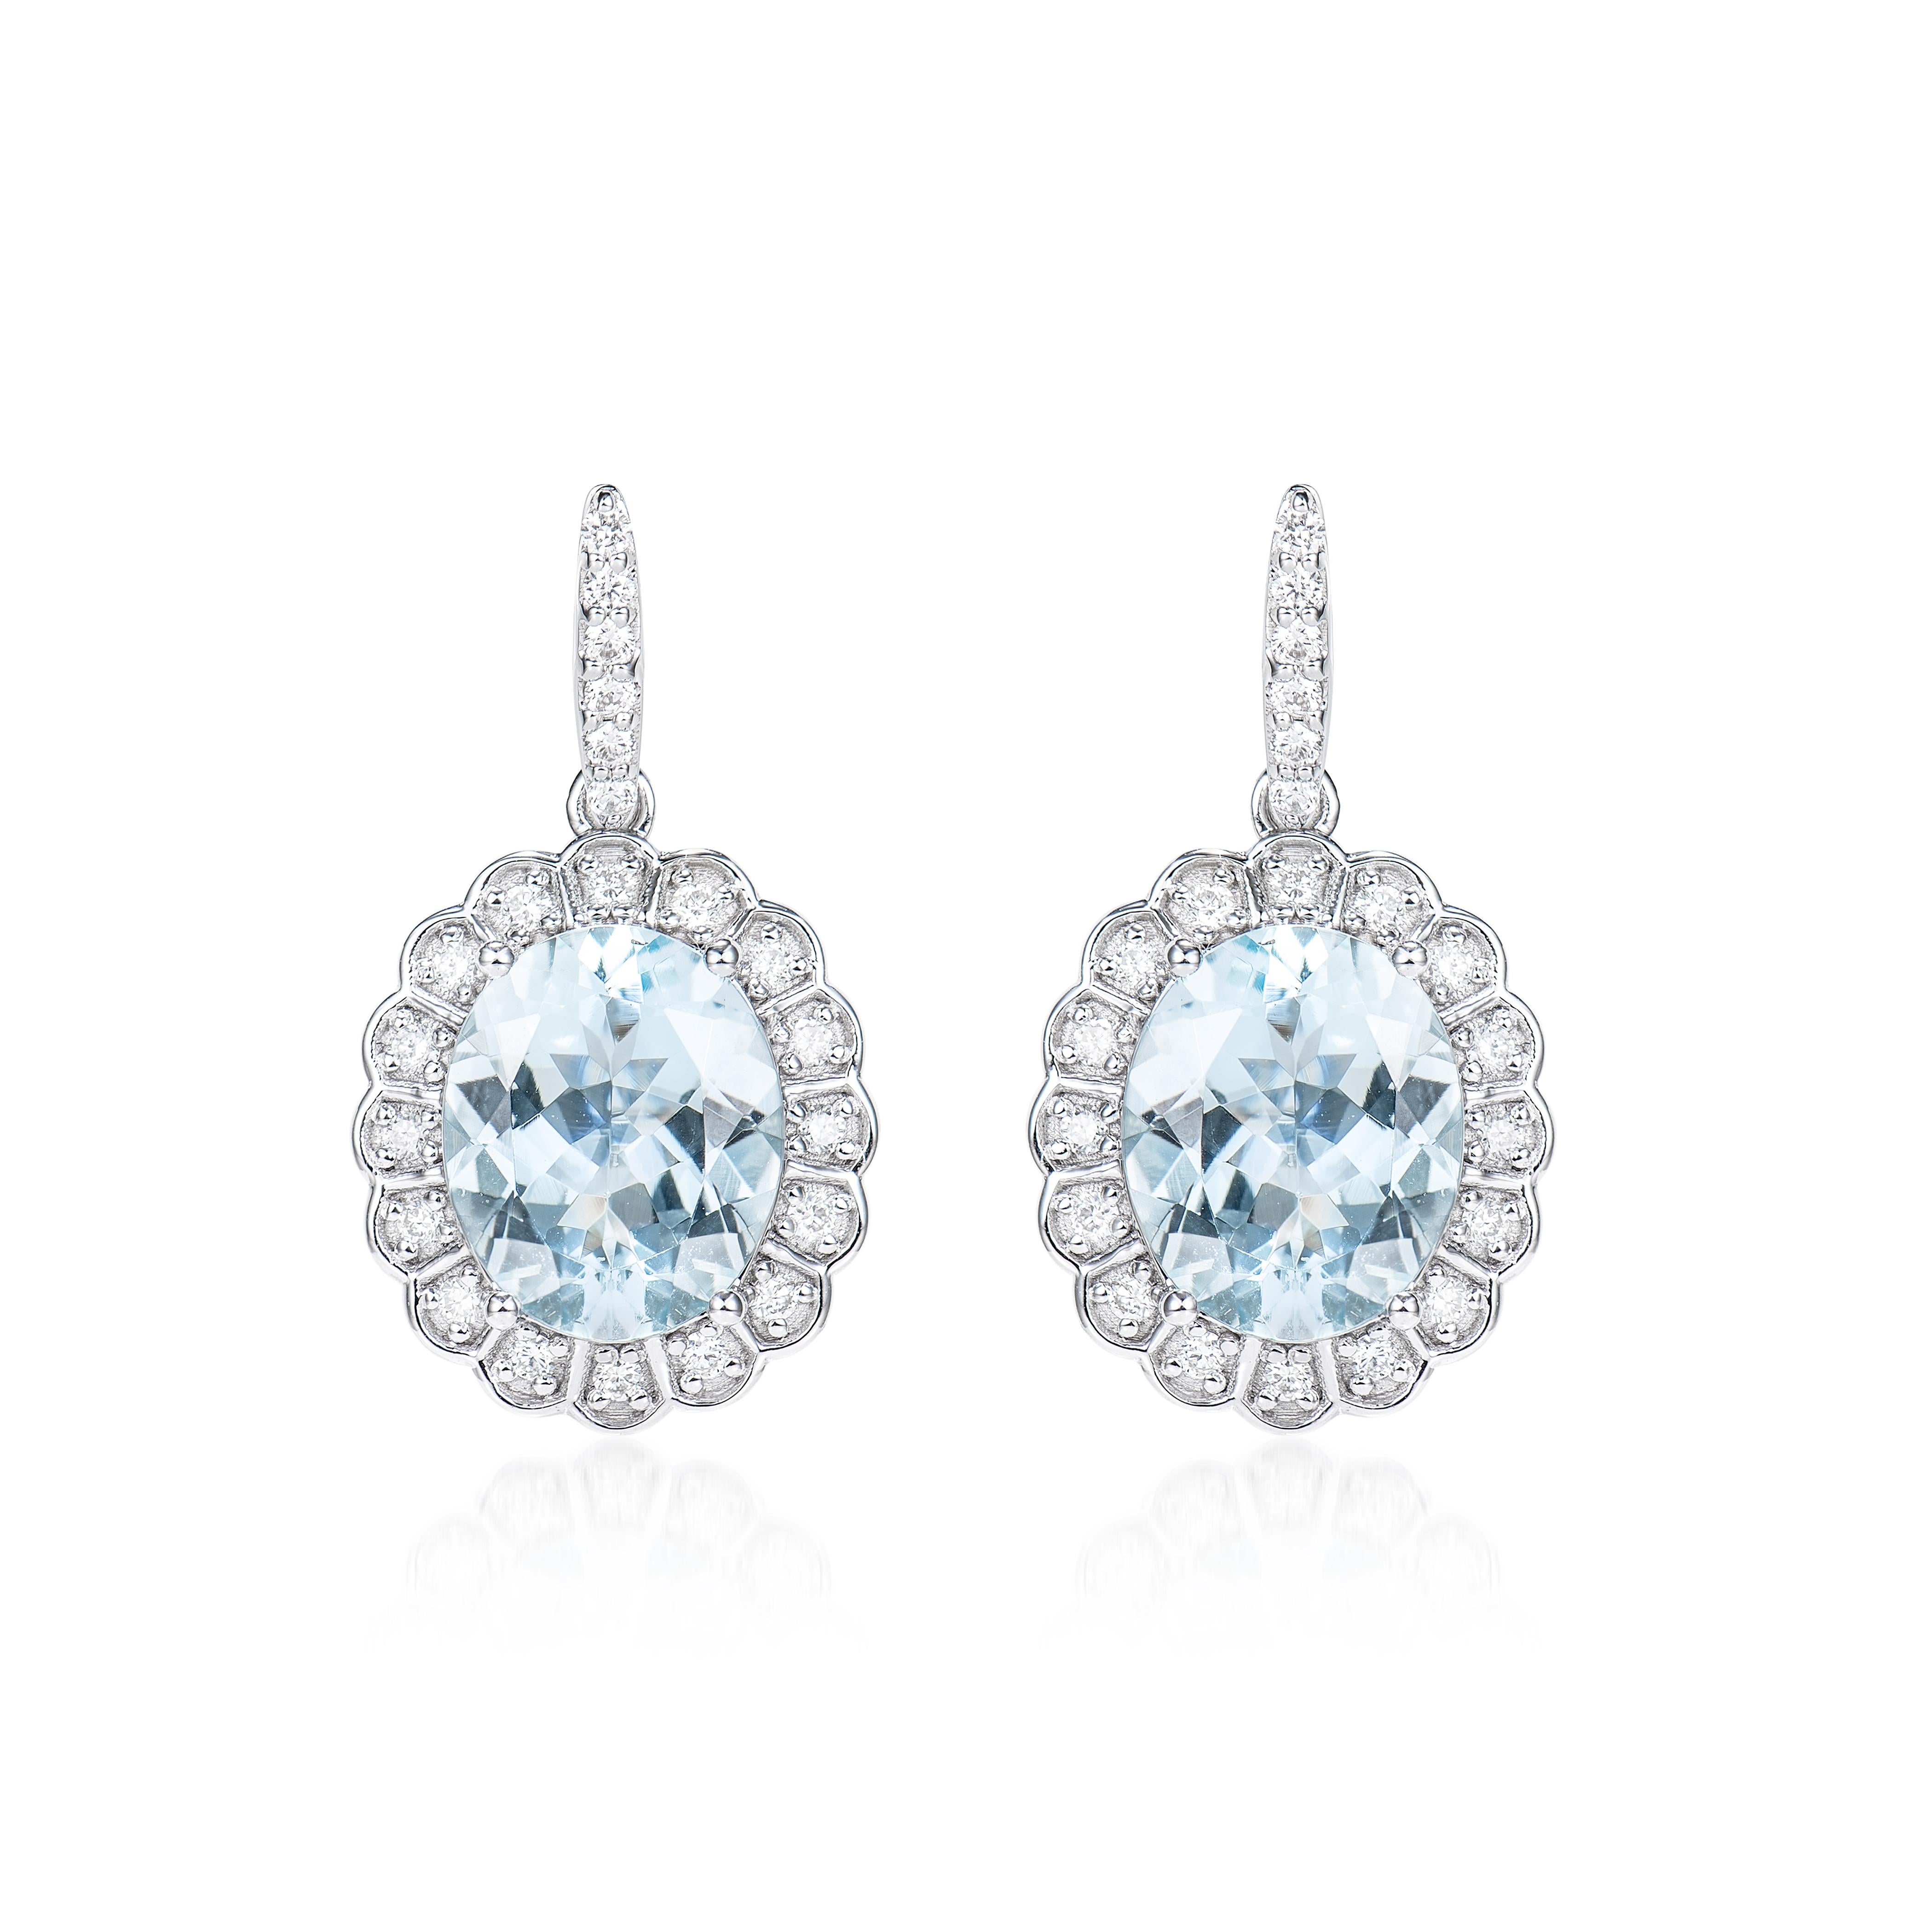 Contemporary 5.52 Carat Aquamarine Drop Earrings in 18Karat White Gold with Diamond For Sale